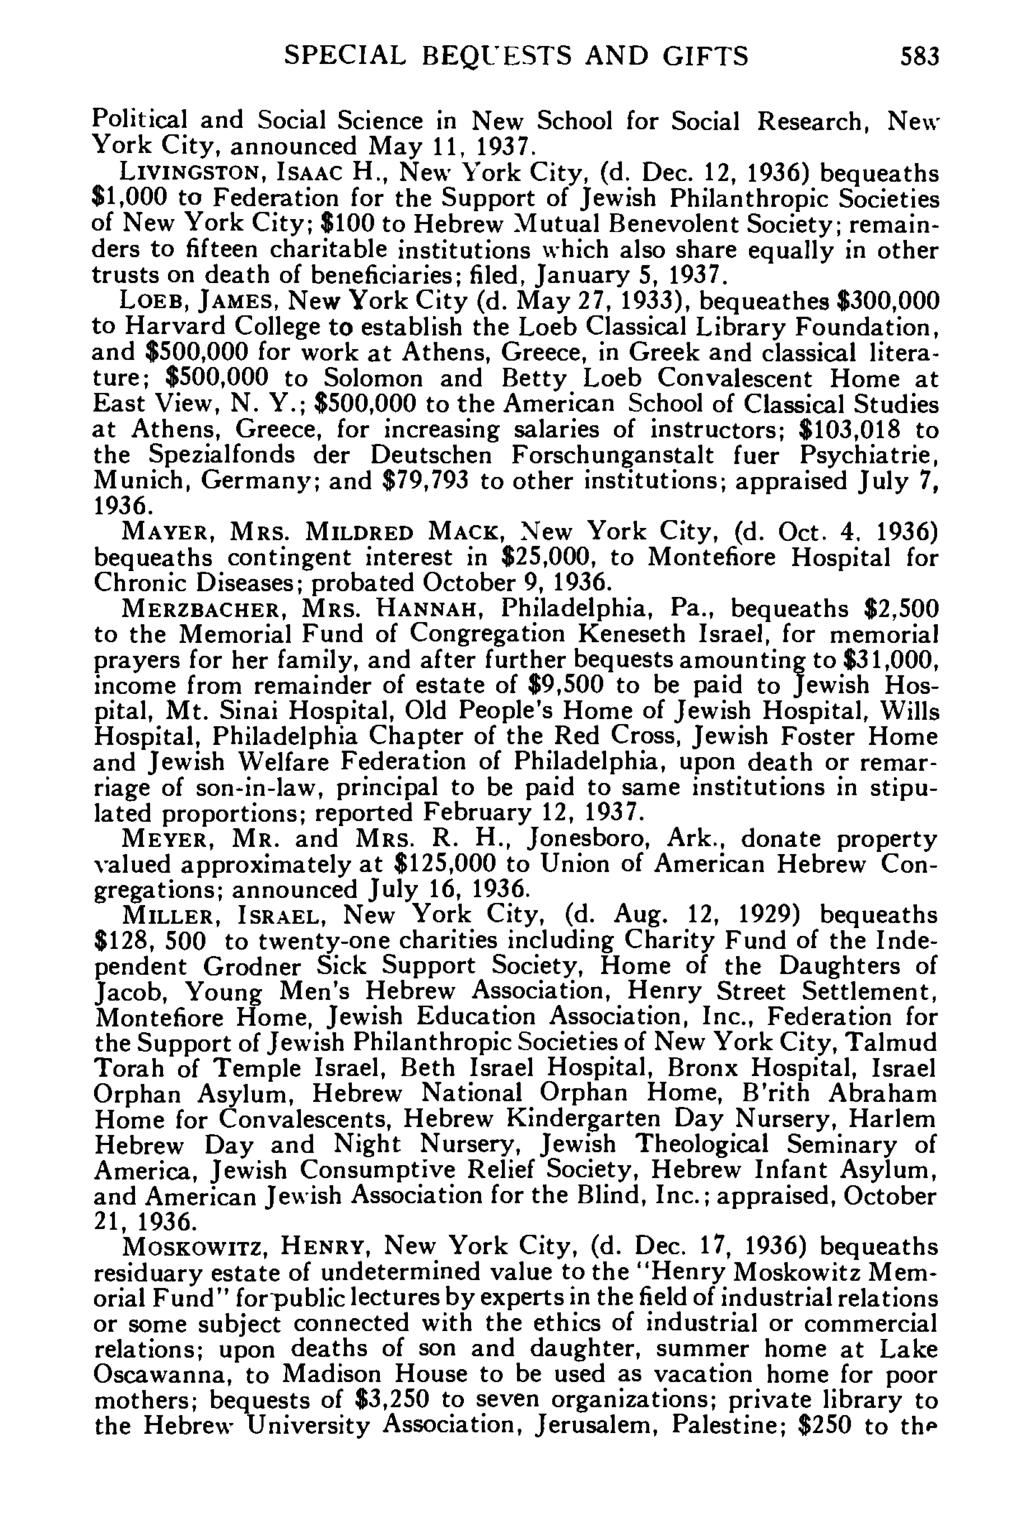 SPECIAL BEQUESTS AND GIFTS 583 Political and Social Science in New School for Social Research, New York City, announced May 11, 1937. LIVINGSTON, ISAAC H., New York City, (d. Dec.